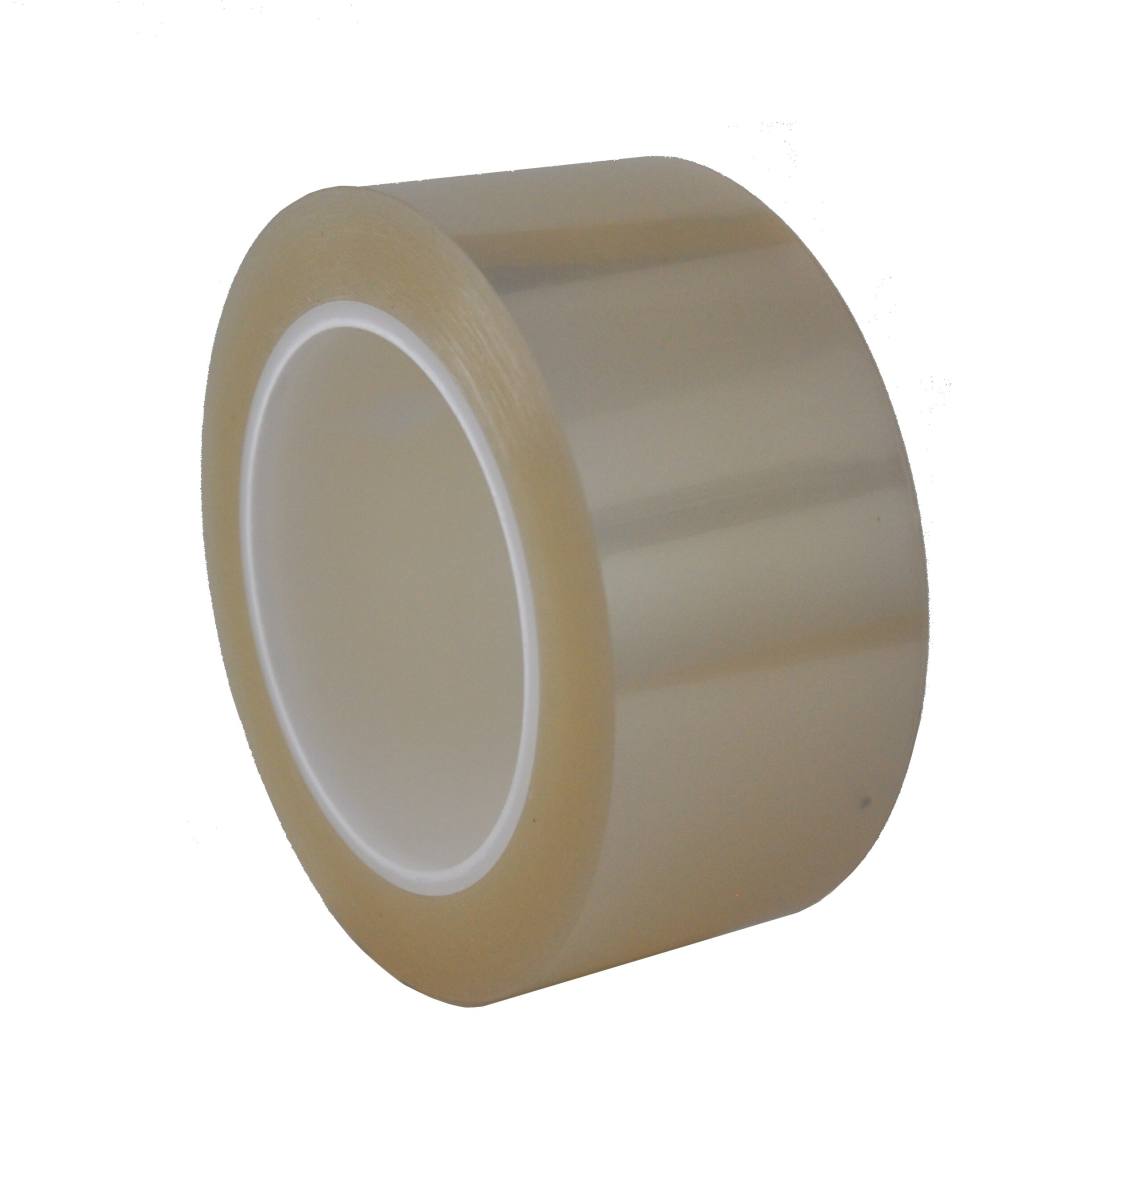 S-K-S 208T polyester adhesive tape, 12mmx66m, transparent